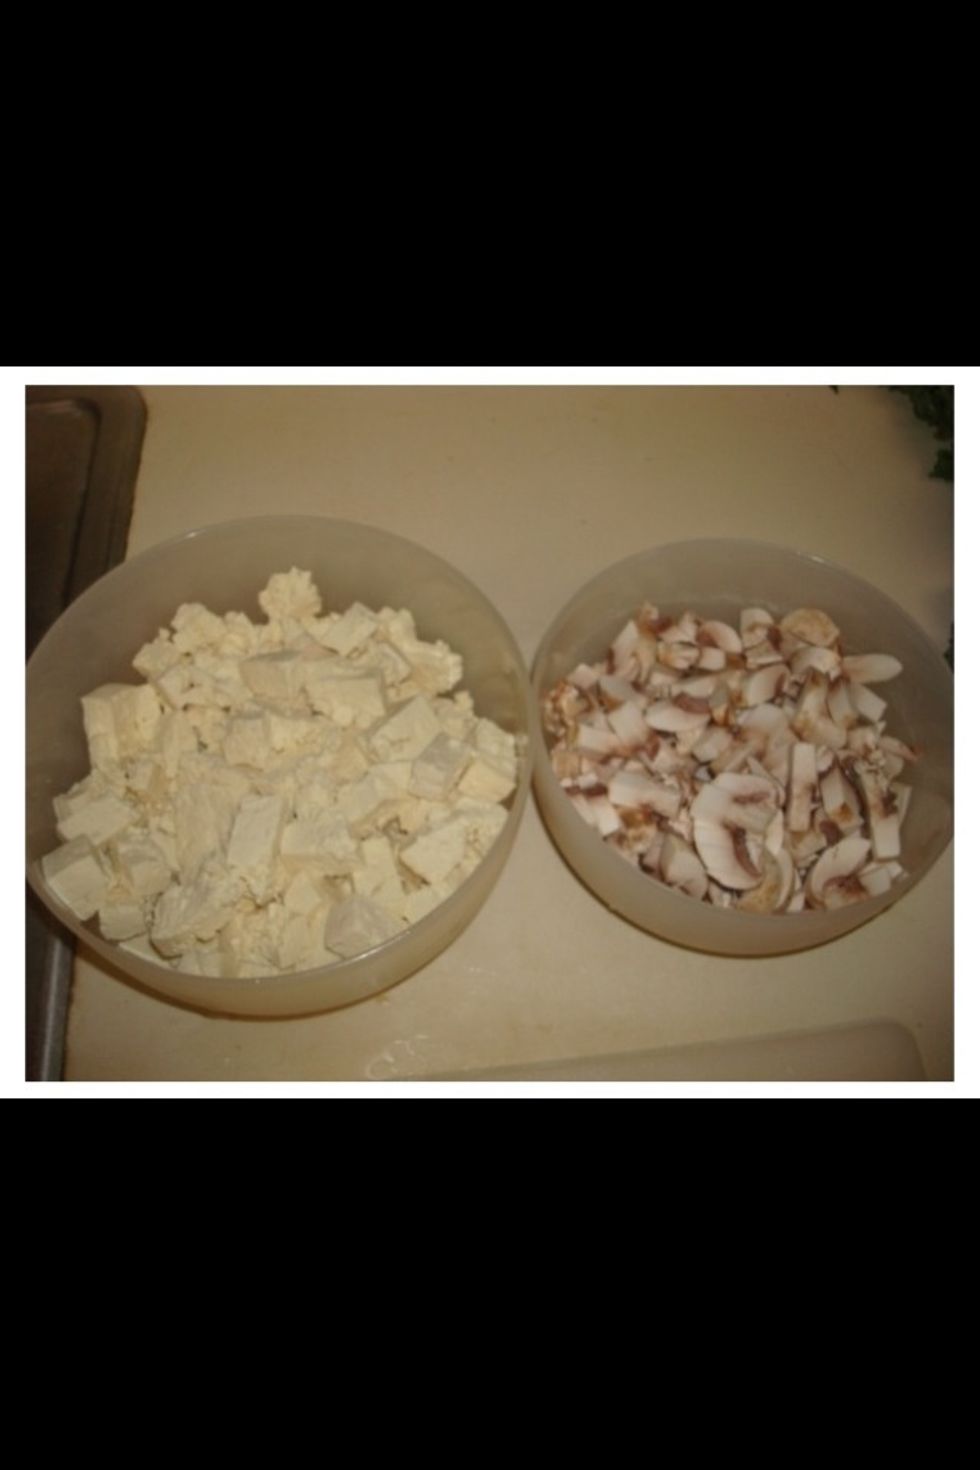 Squeeze excess water from tofu and set aside with chopped mushrooms.